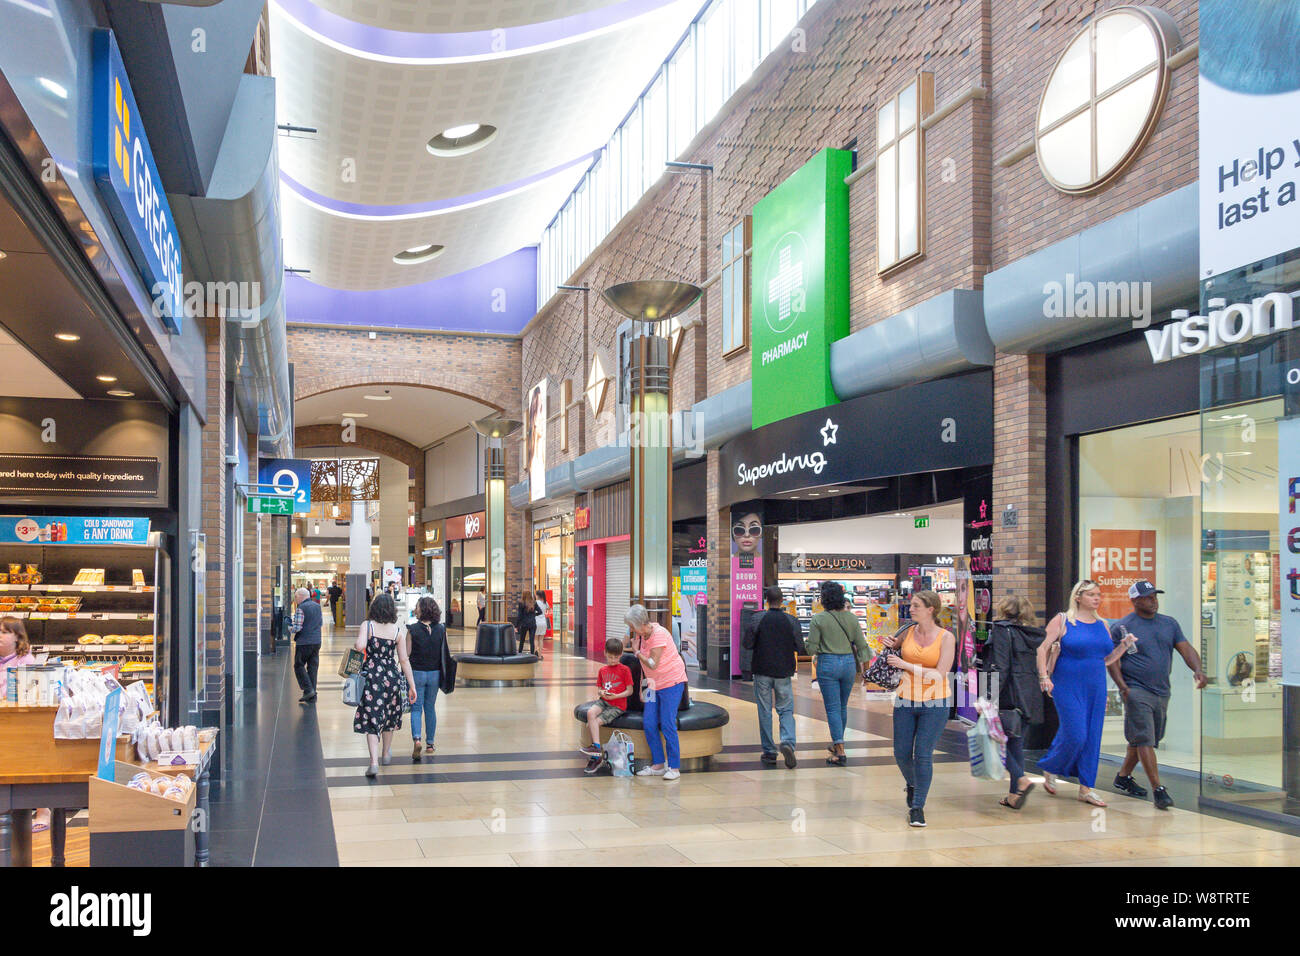 Interior of Touchwood Shopping Centre, Solihull High Street, Solihull, West Midlands, England, United Kingdom Stock Photo